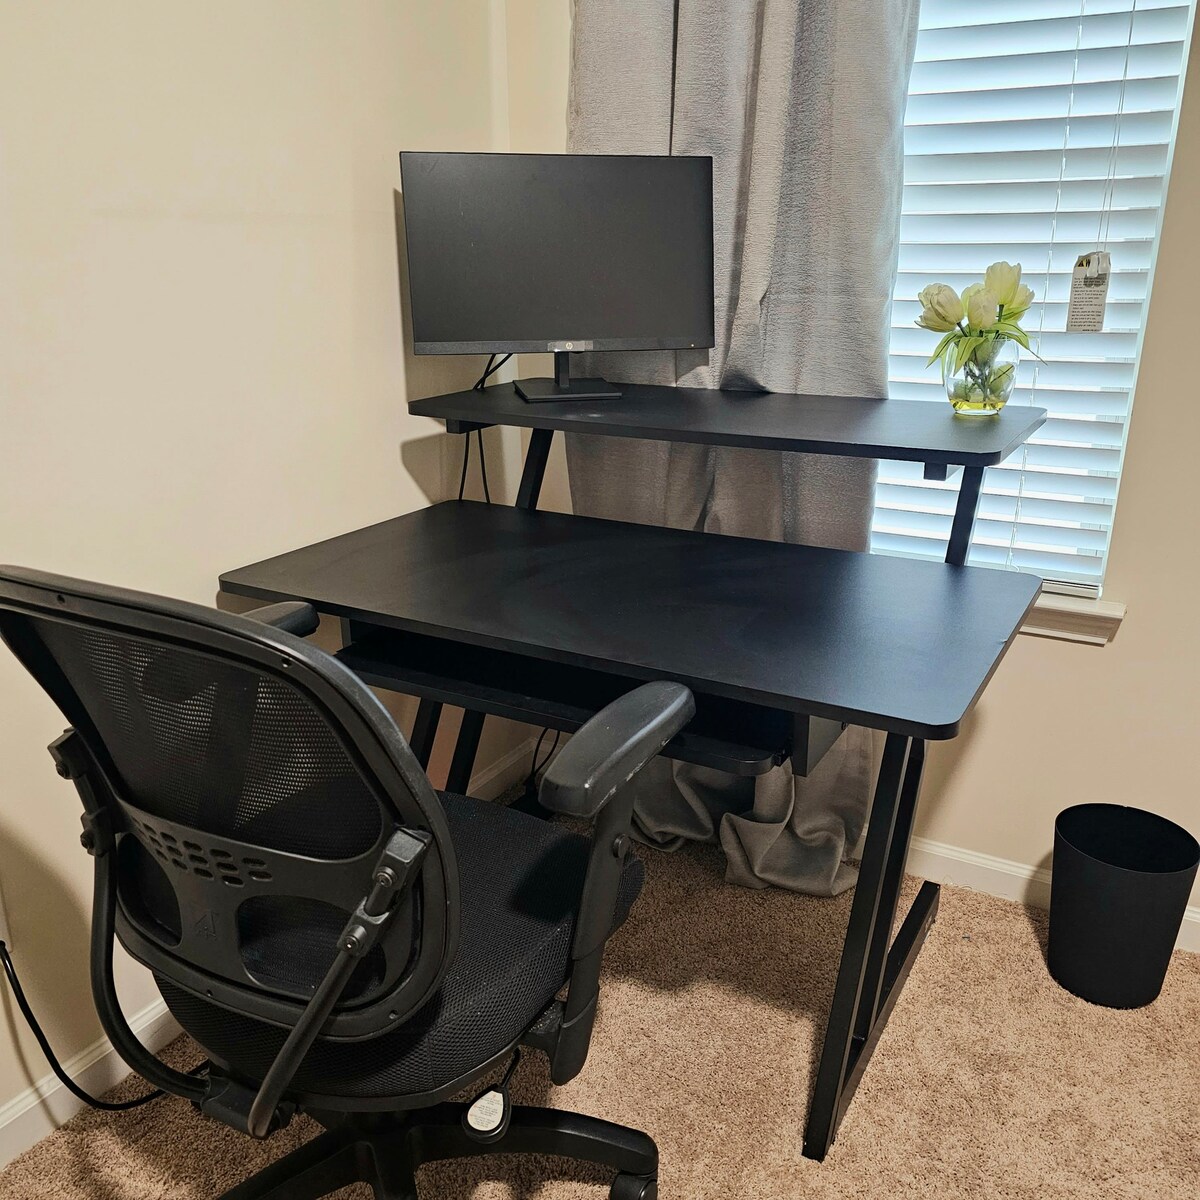 Queen Bed & Desk w/ Monitor 8-min From Airport!